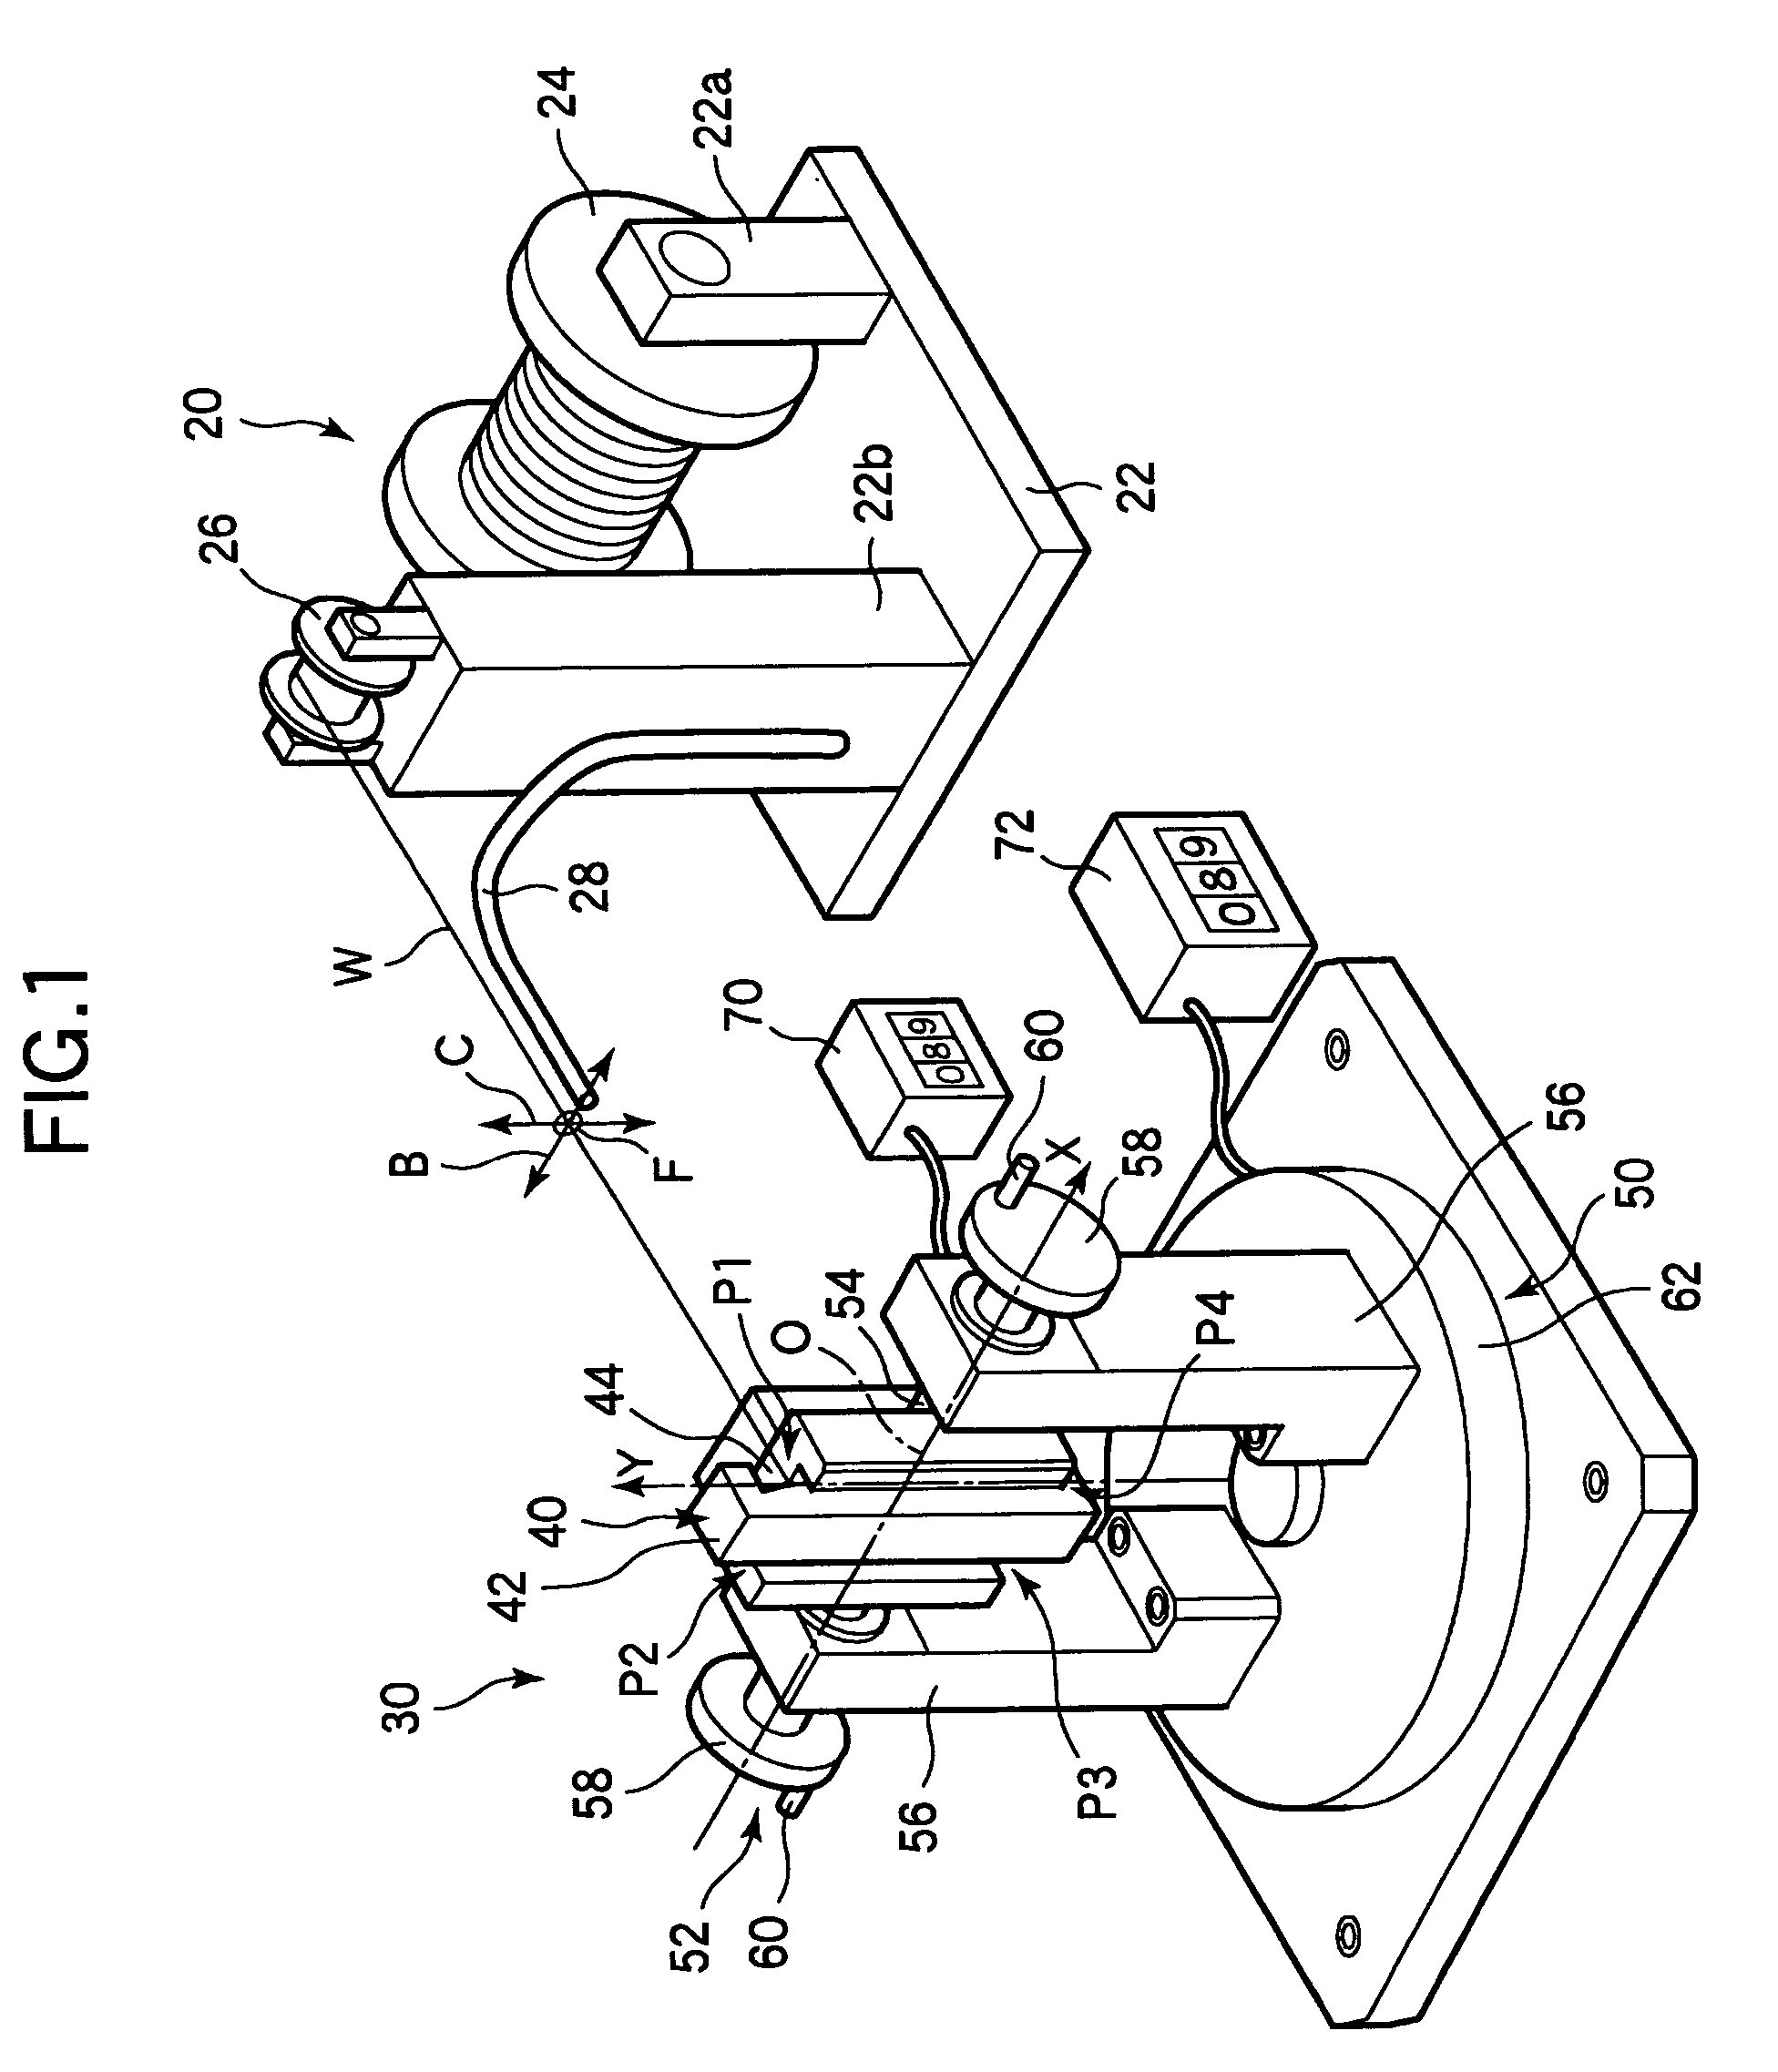 Method for winding a single coil of a coil unit for a linear motor